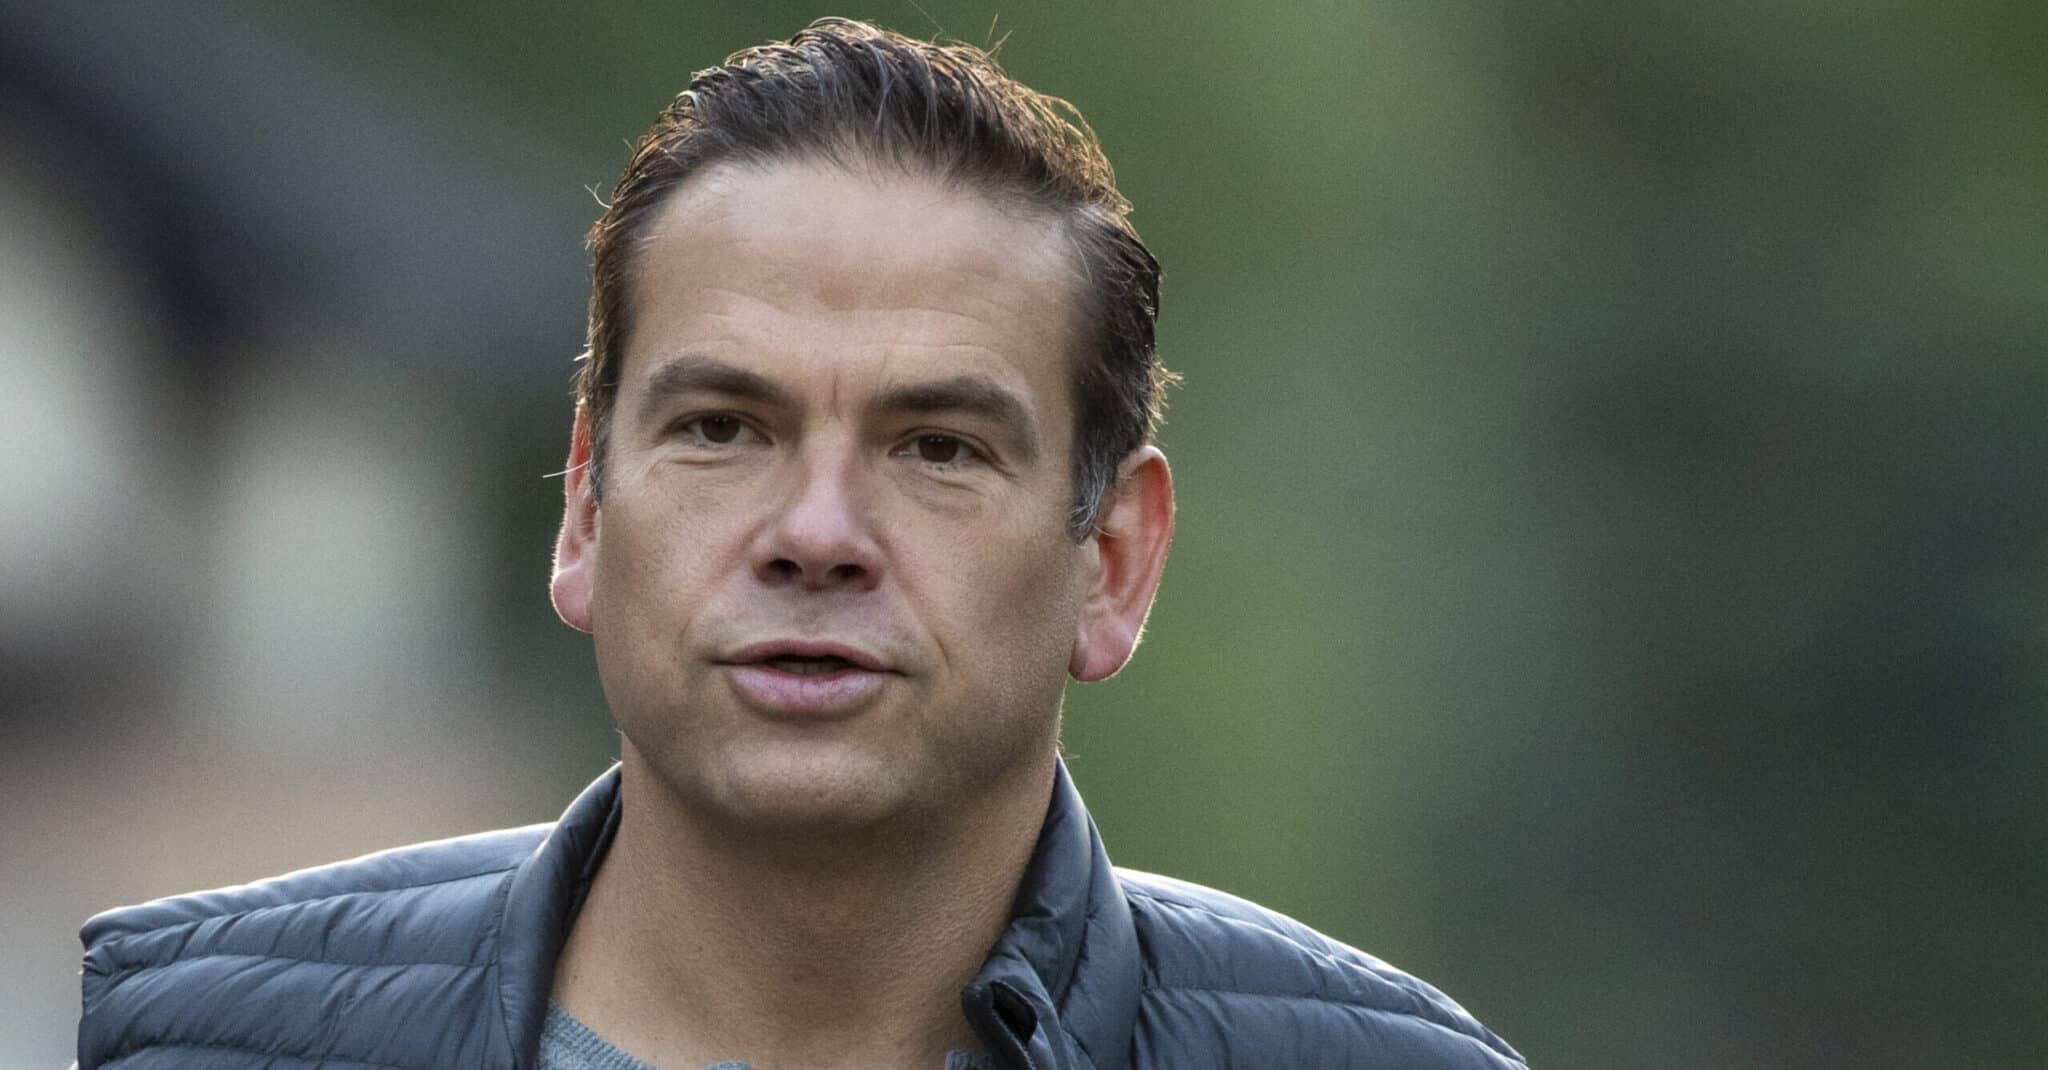 Report: Lachlan Murdoch Views Trump as Bad for America, But Keeps Fox News Behind Him Because It’s Good for Business